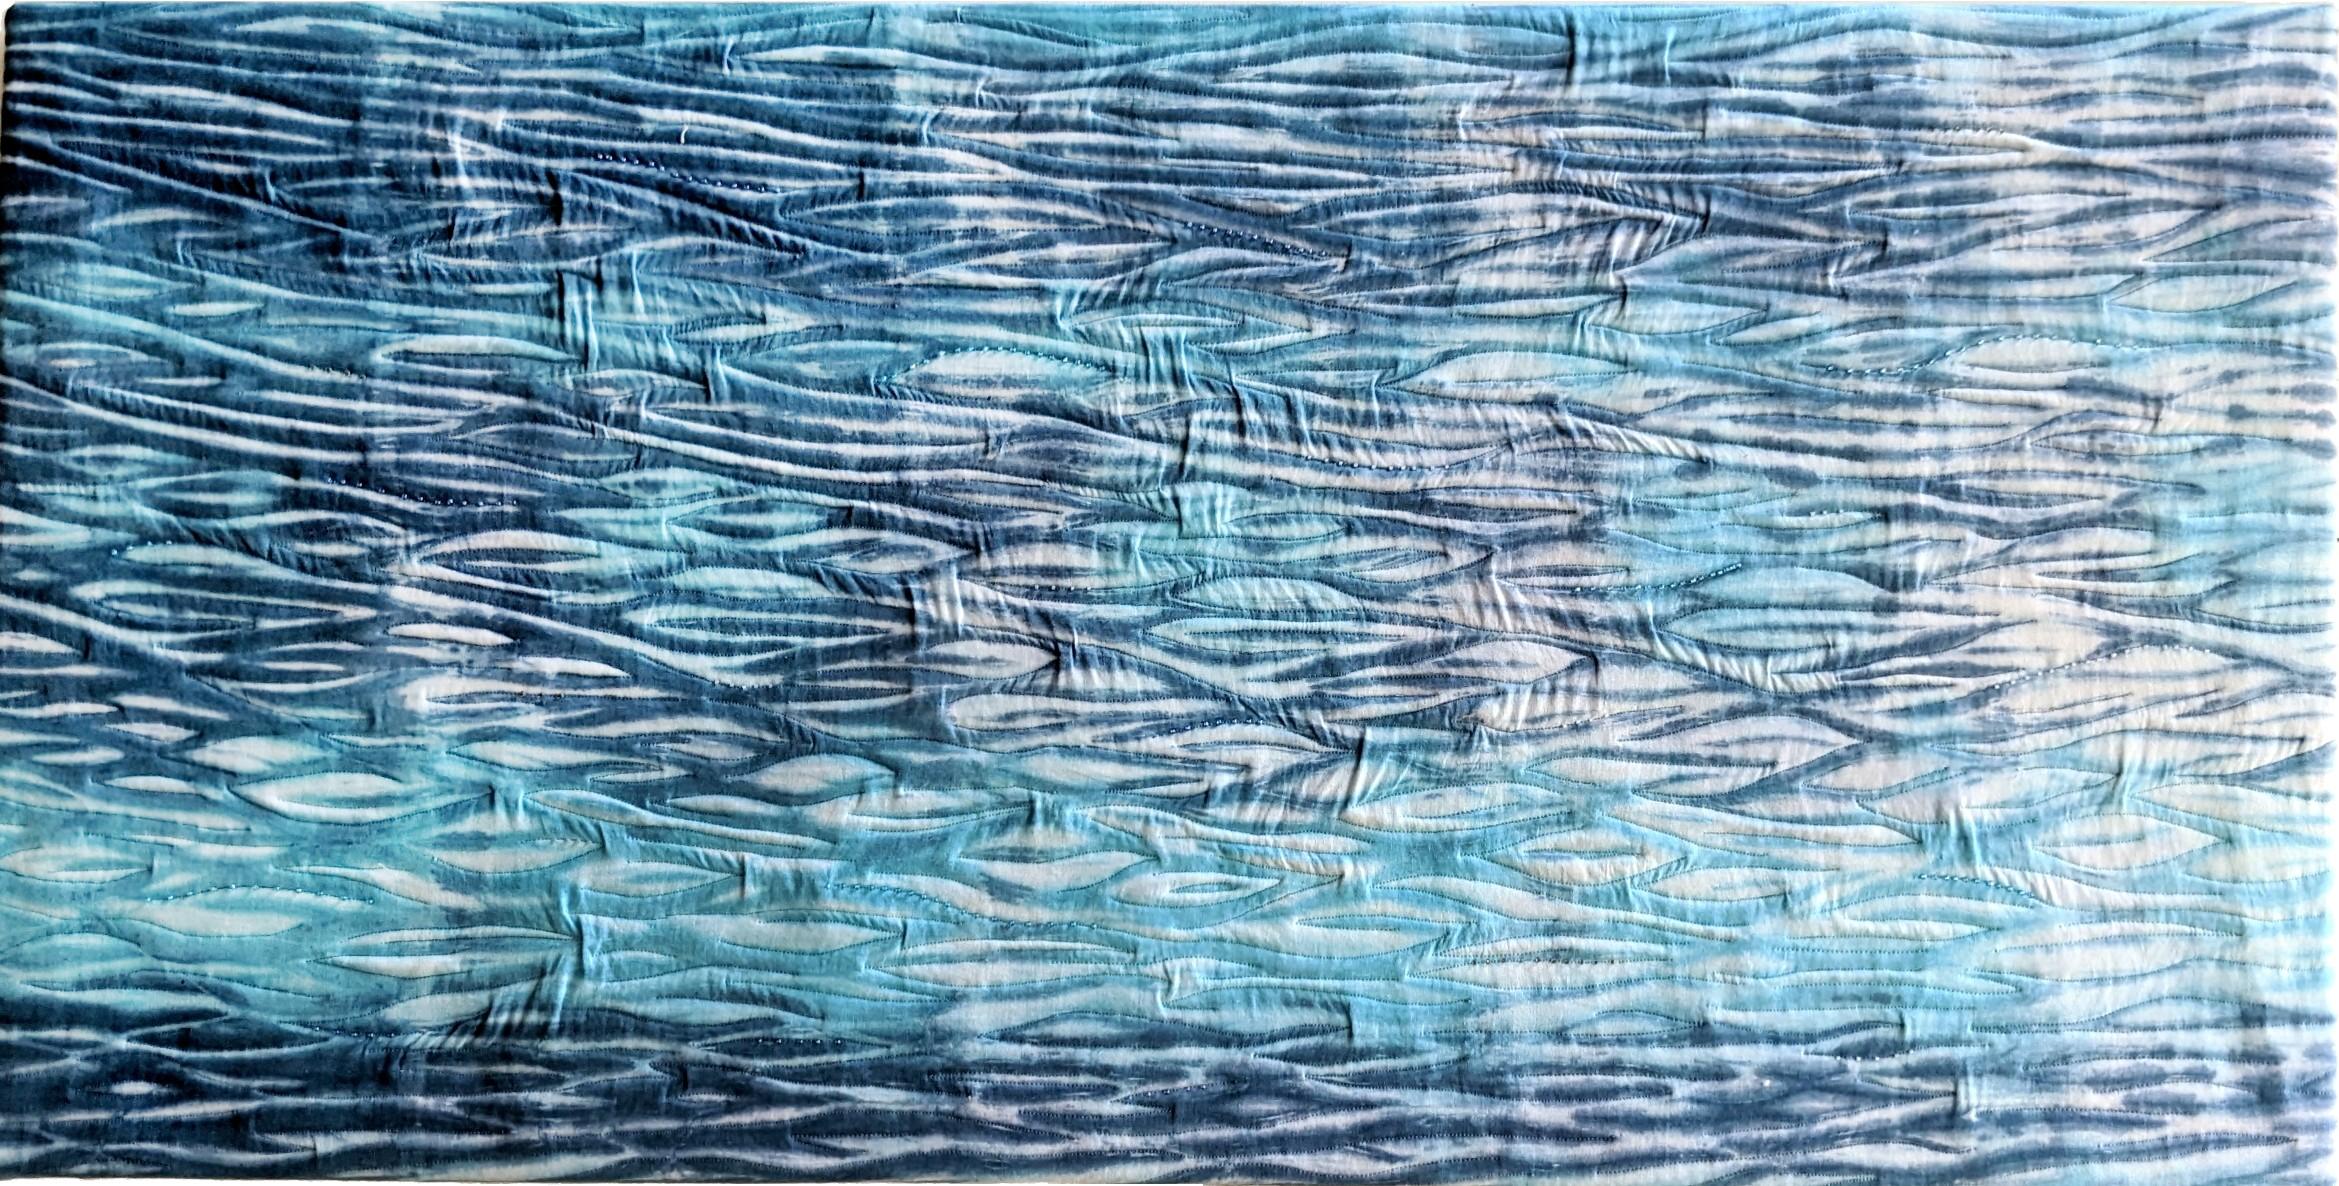 Shibori dyed fabric with machine quilting and beads. 52 x 104cm